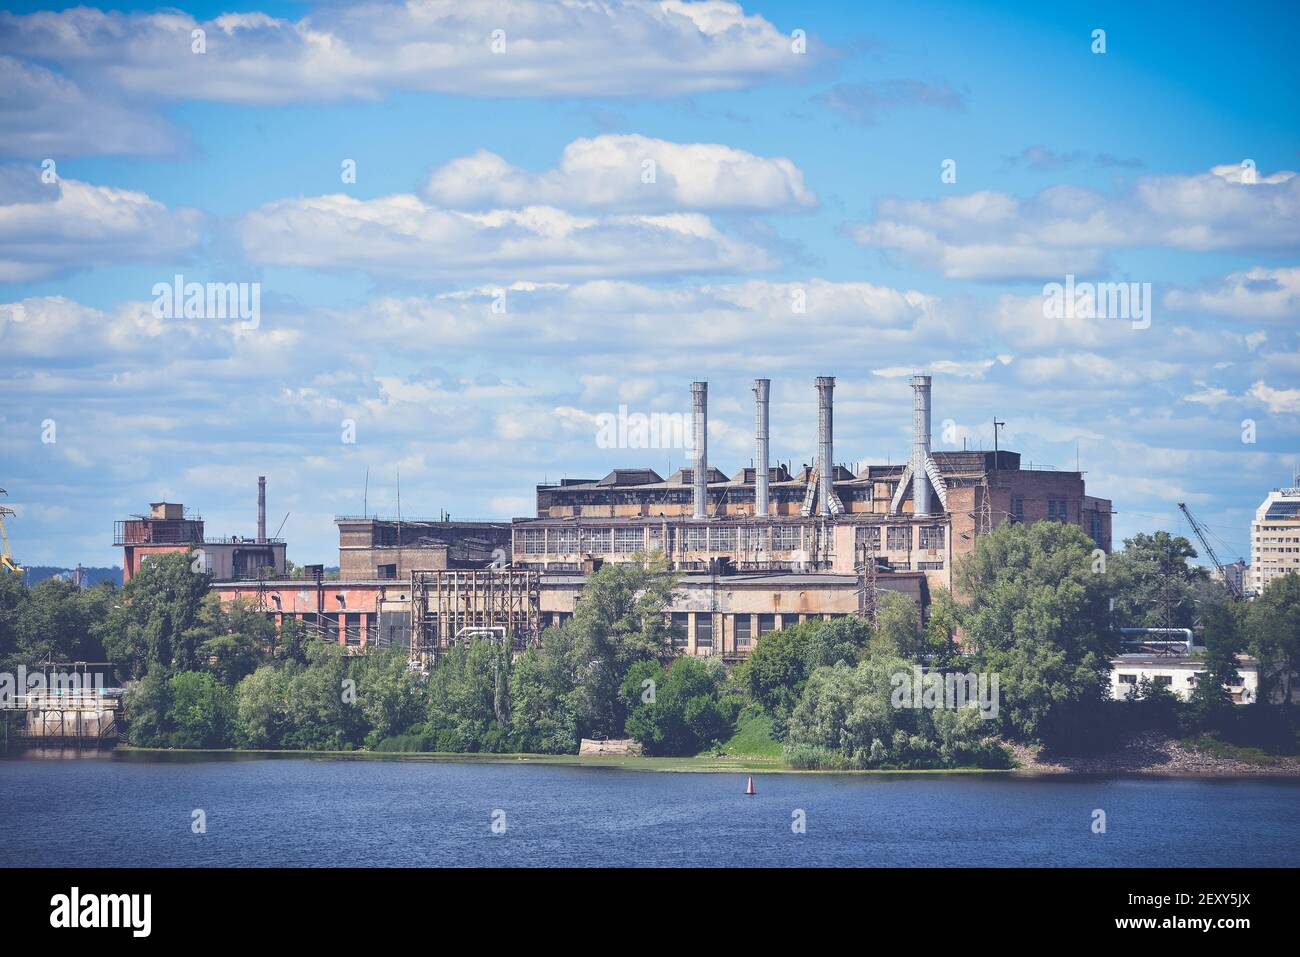 Old industrial building on the river bank Stock Photo